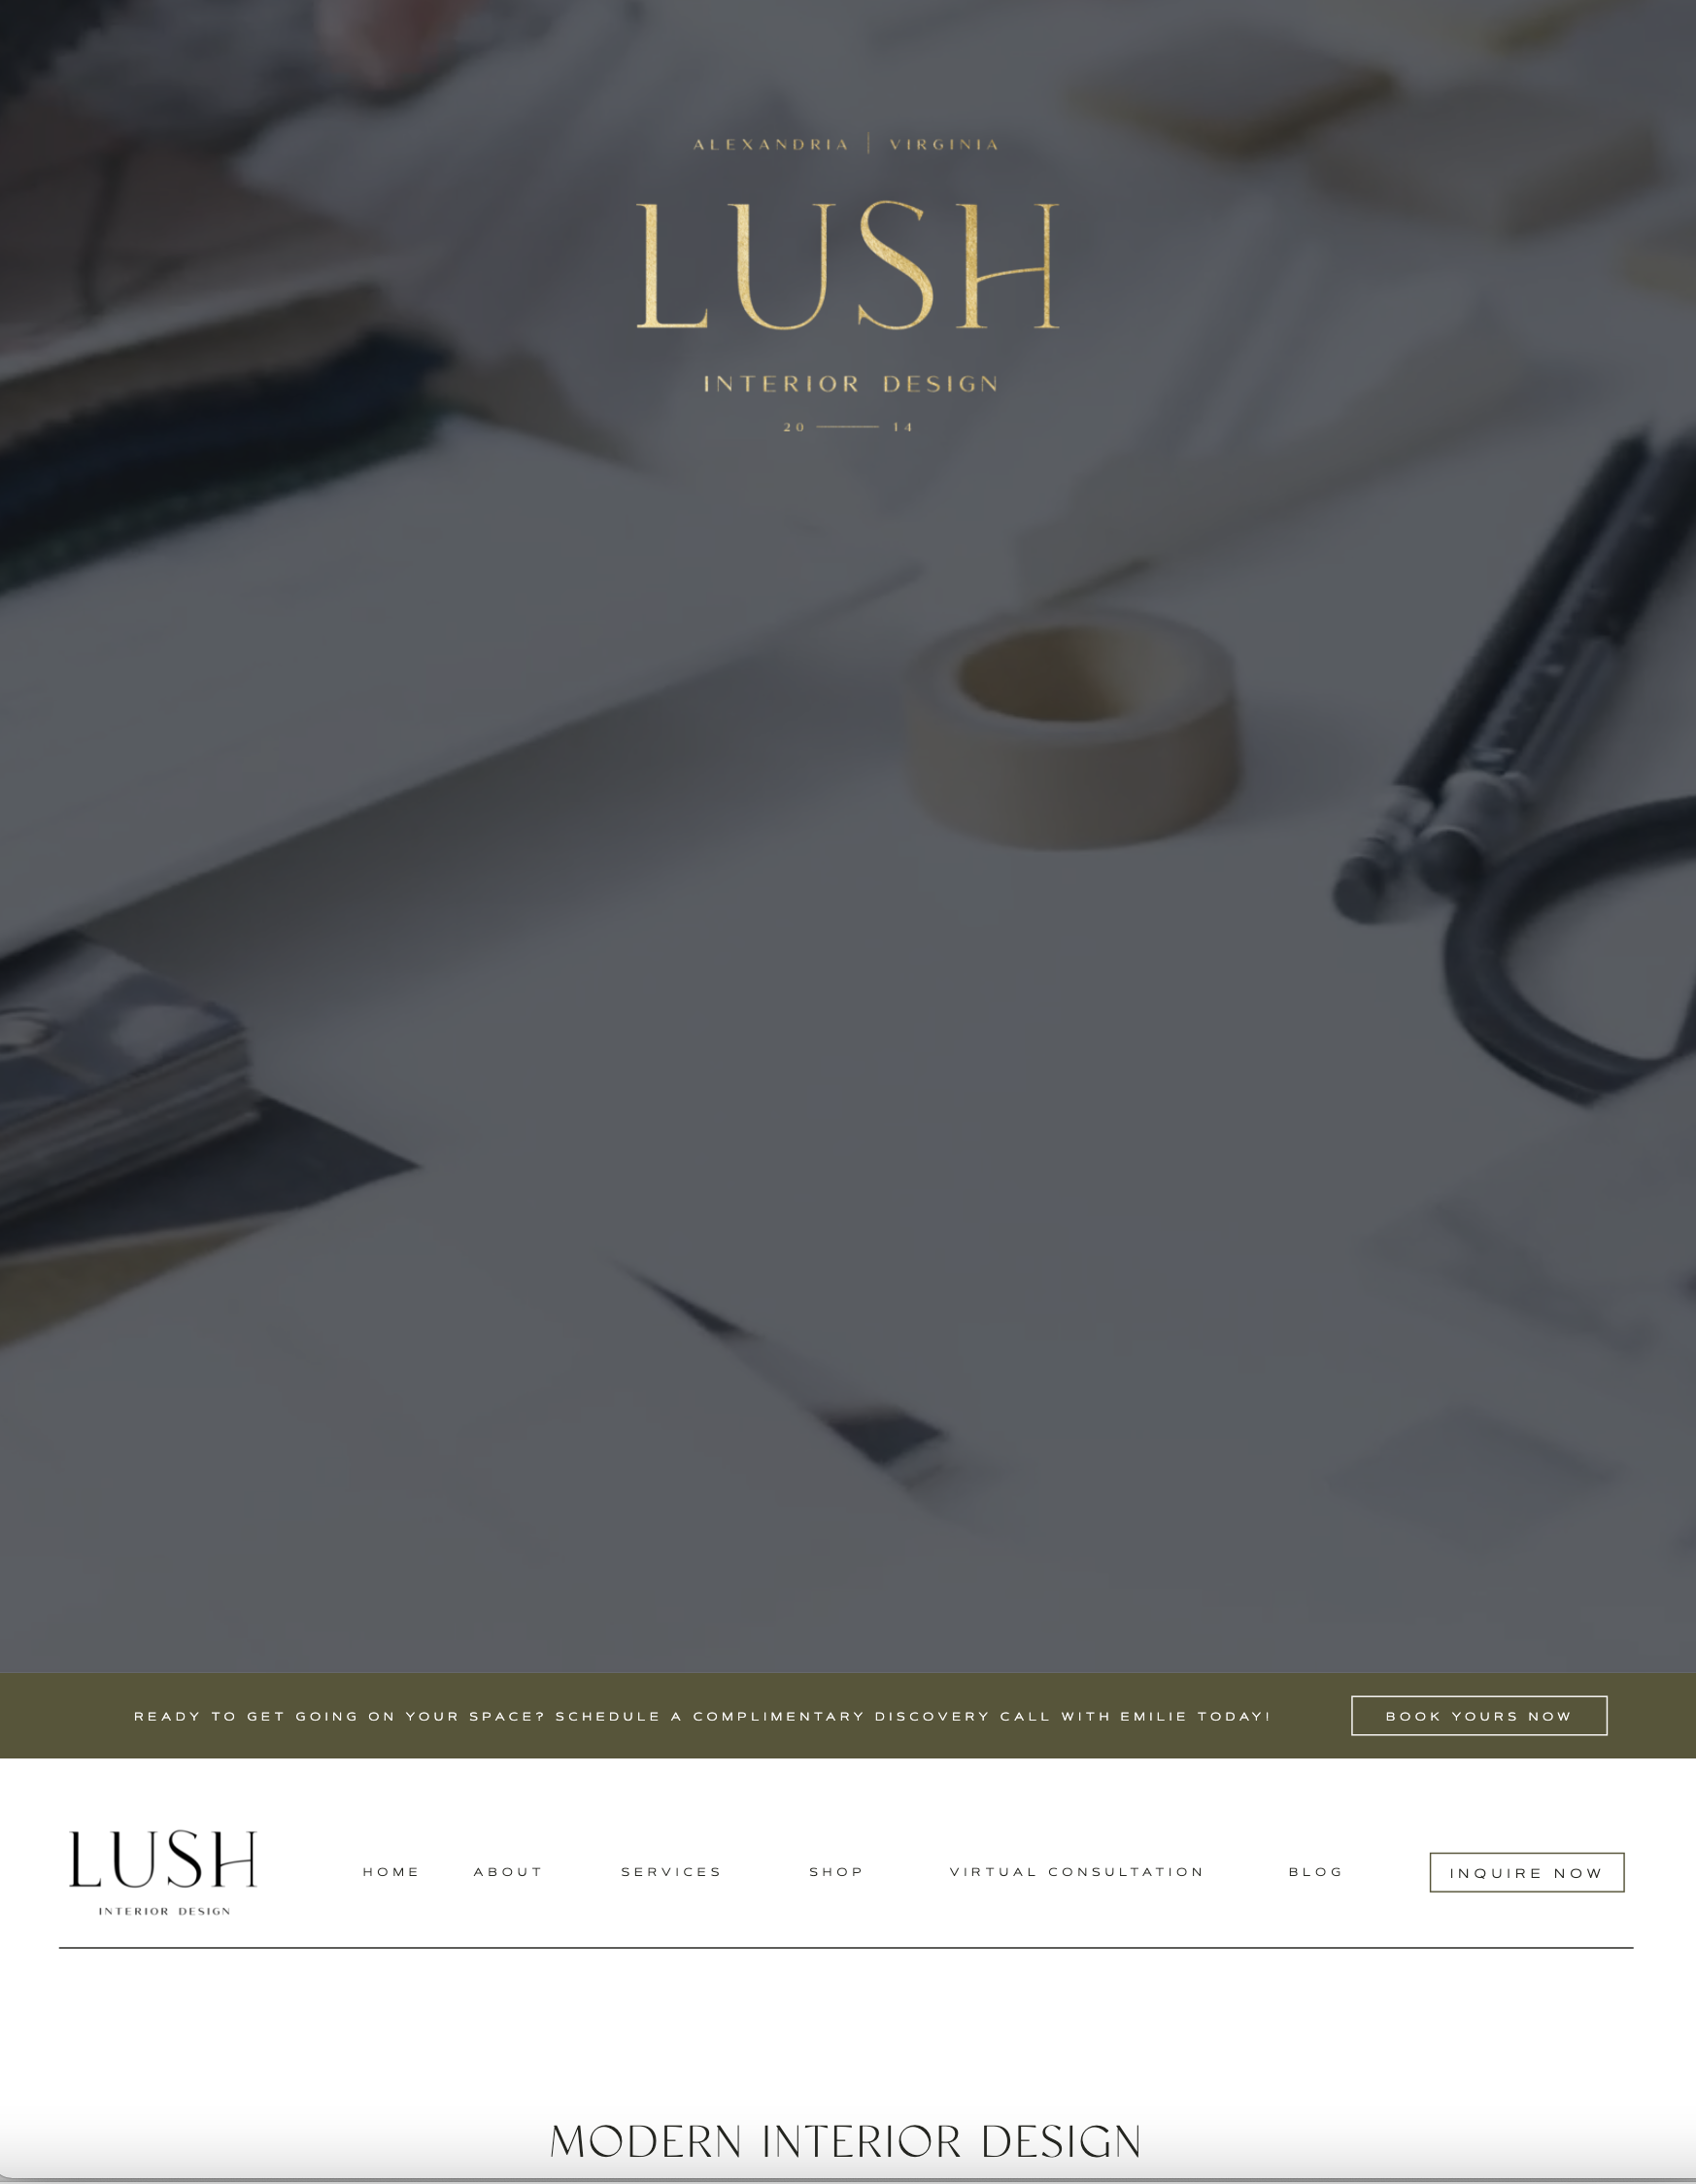 BEFORE & AFTER: A New Look for the Lush Interior Design Website￼